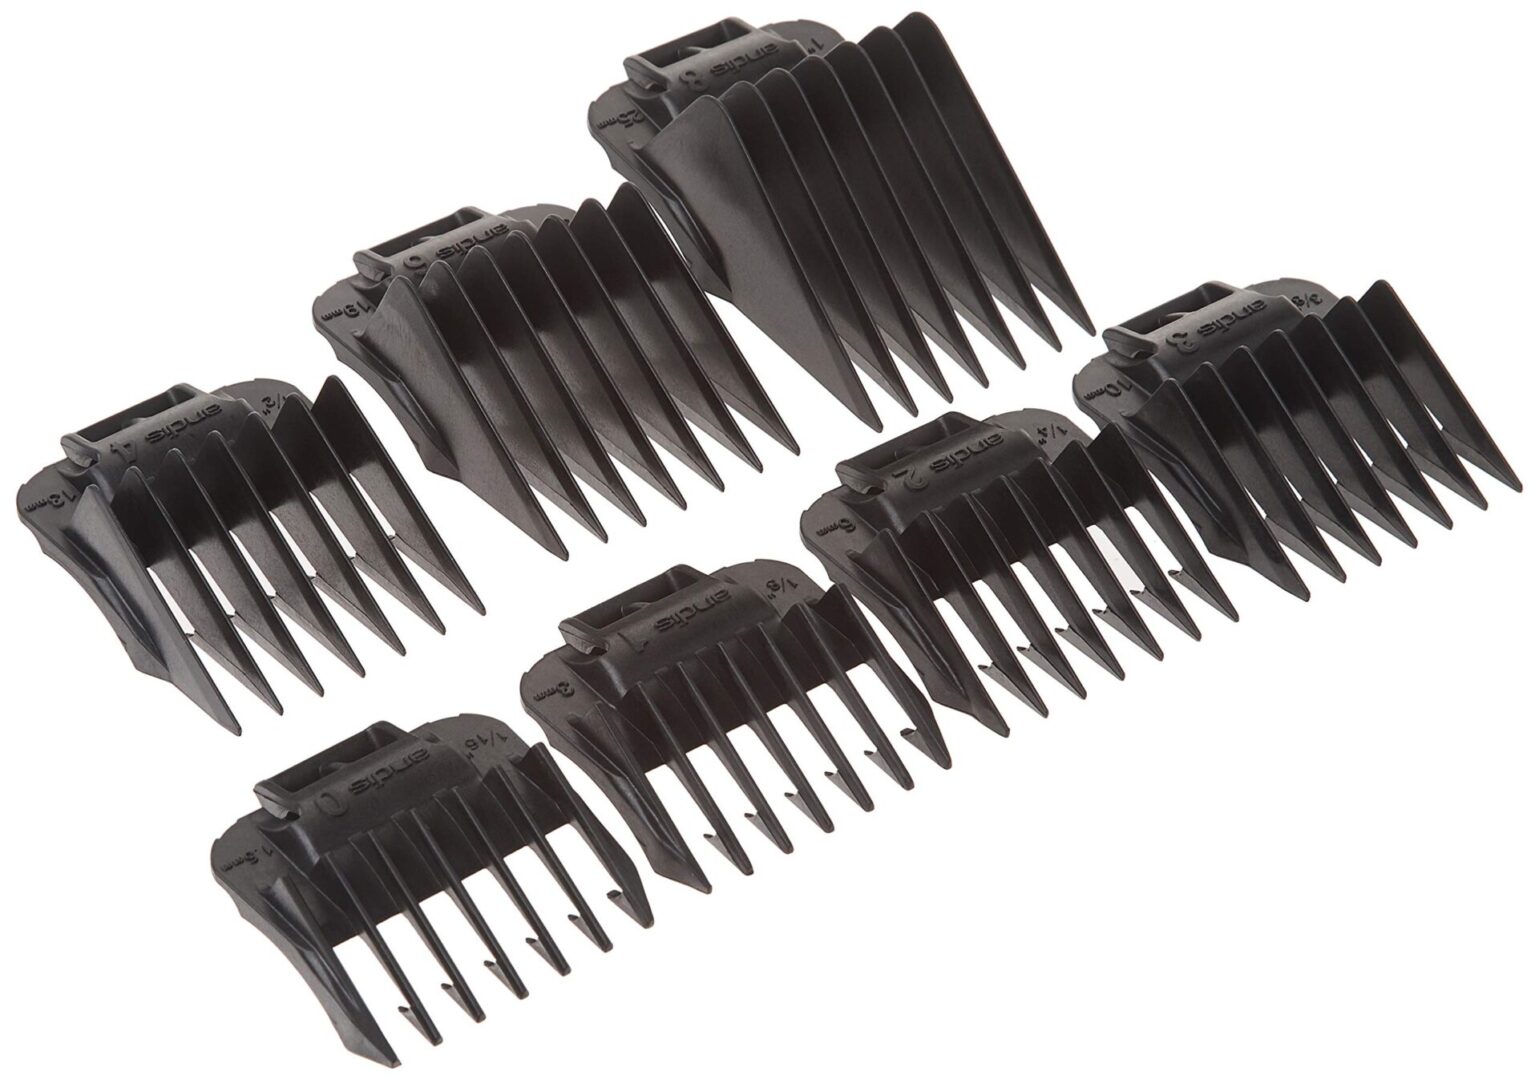 A set of different sizes and shapes of hair clippers.